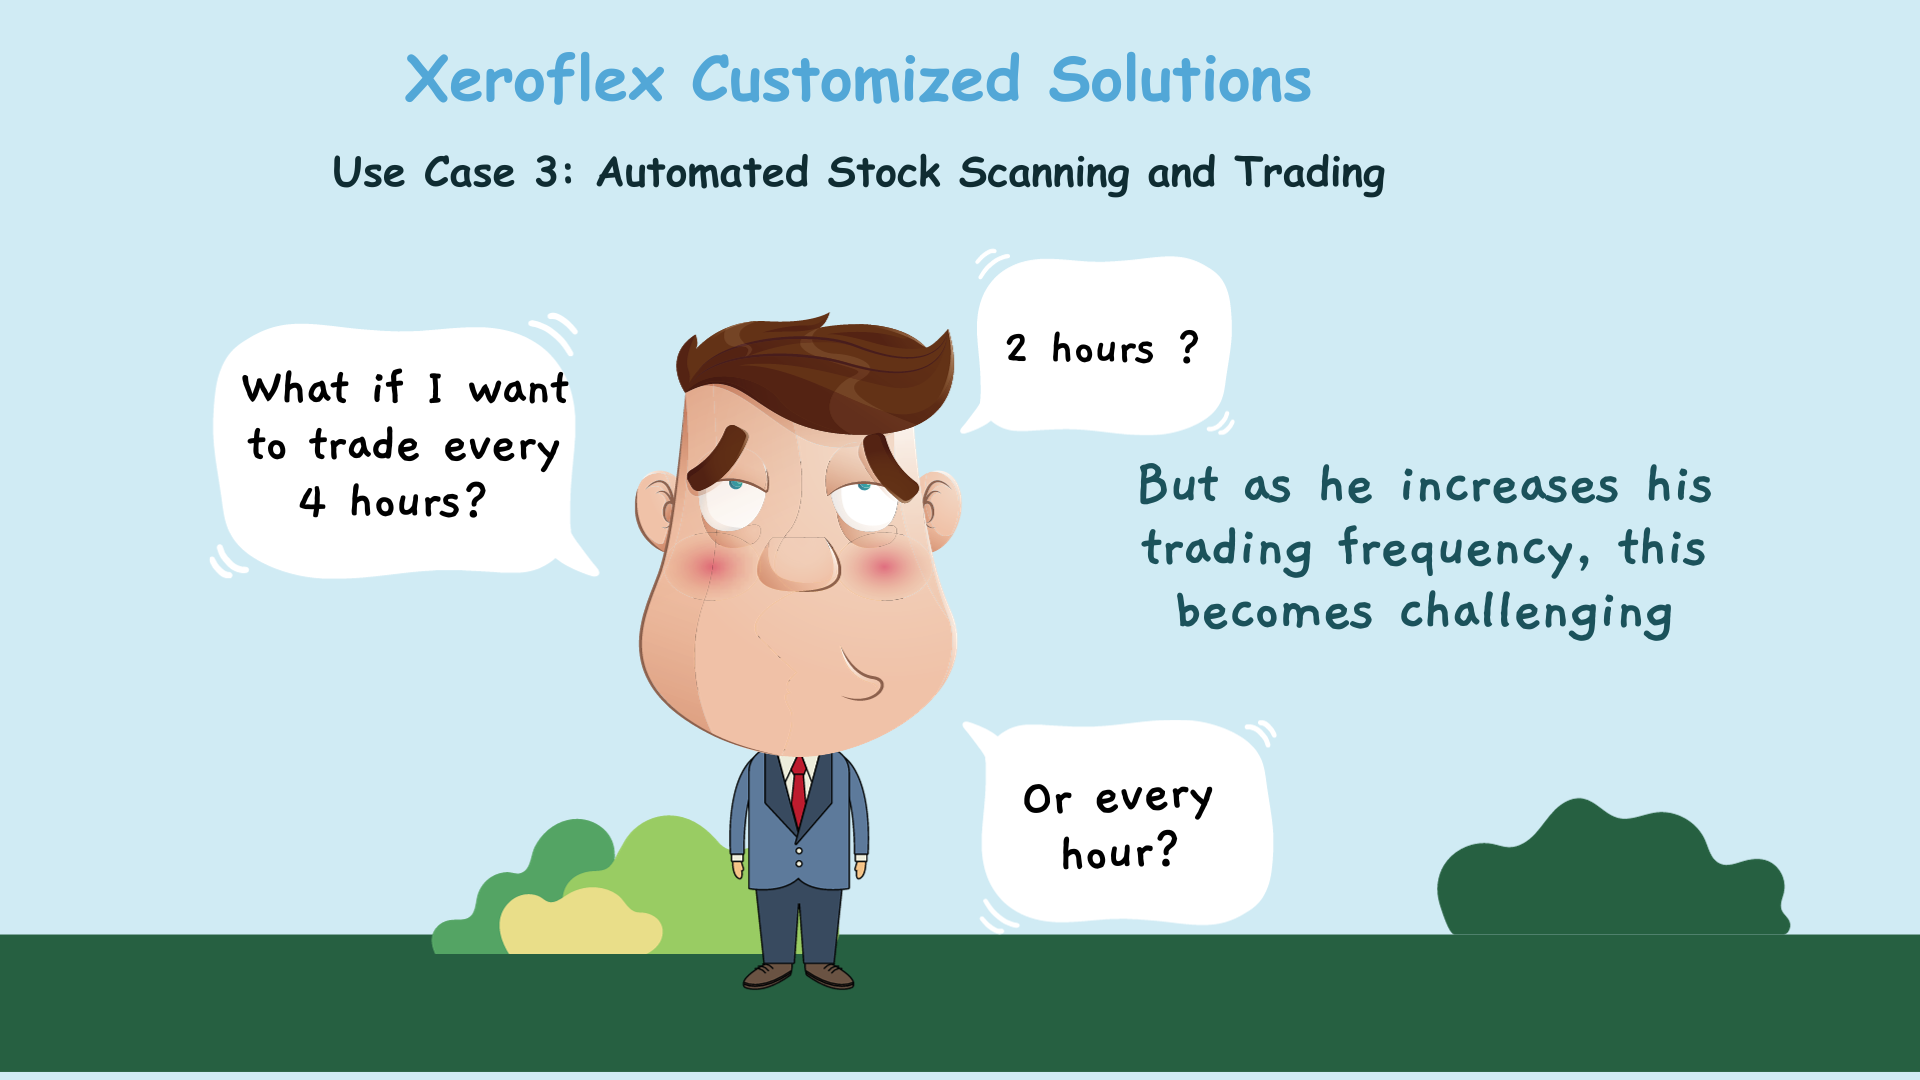 Use Case 3: Automated Stock Scanning and Trading